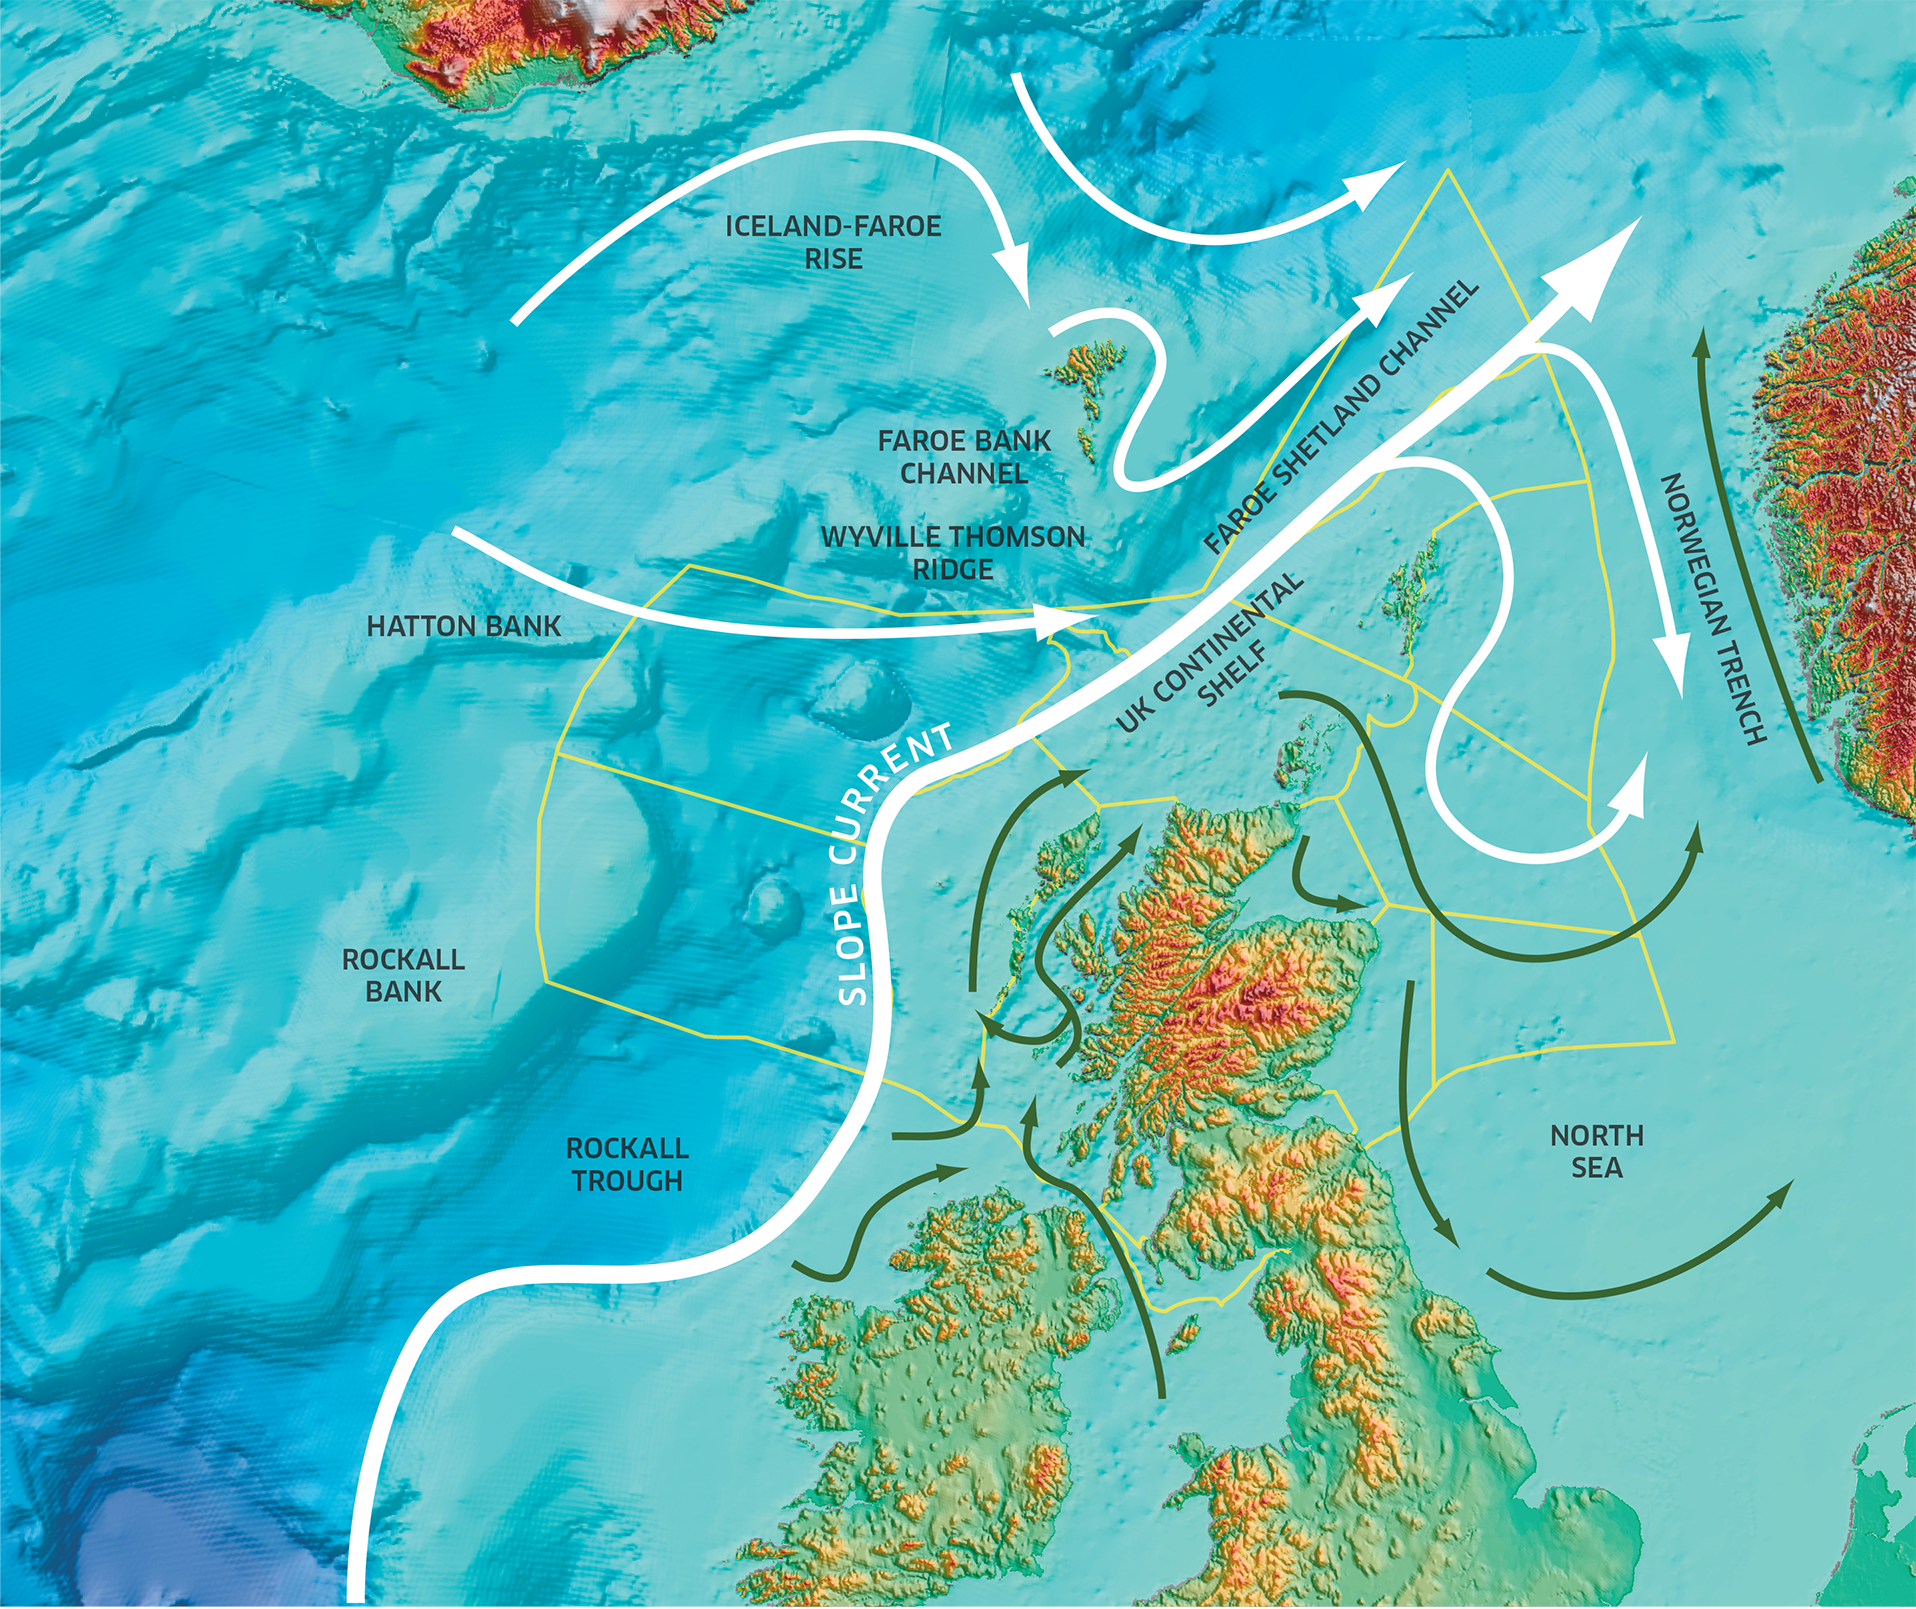 Figure 1. Circulation map representing the general circulation pattern within the North Atlantic and North Sea areas